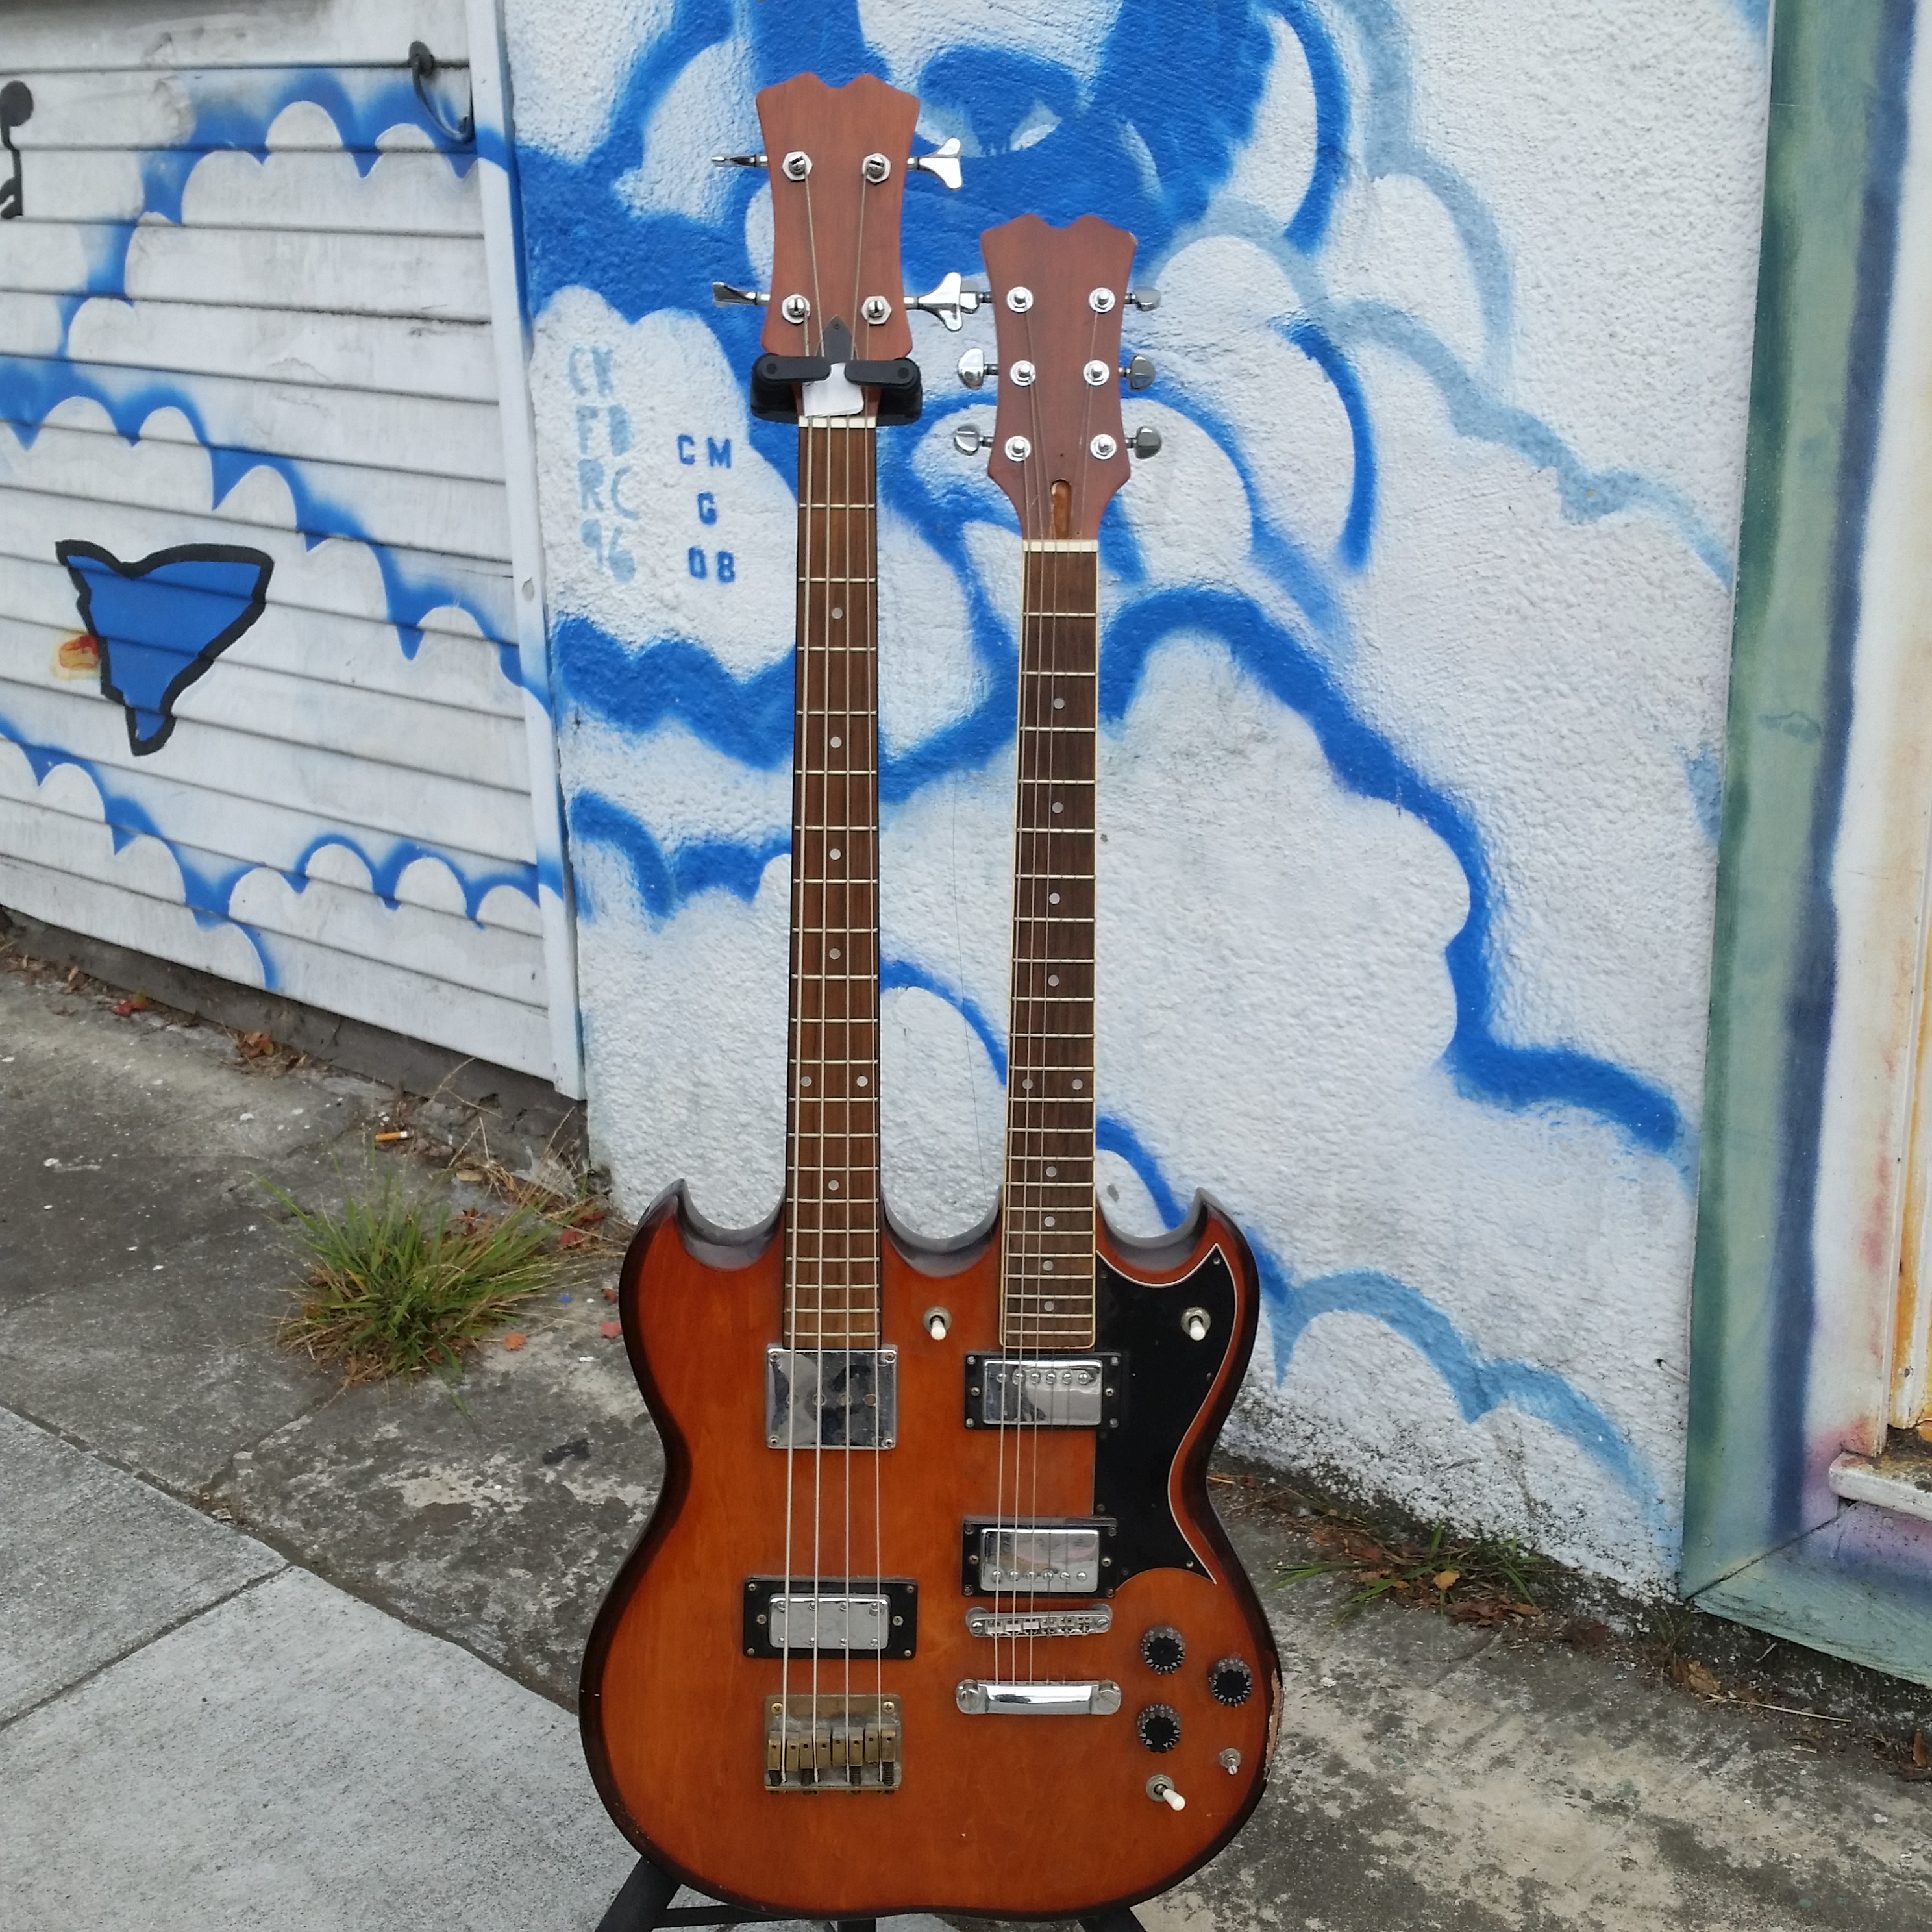 Old double neck could be made to 6 string + Baritone $350